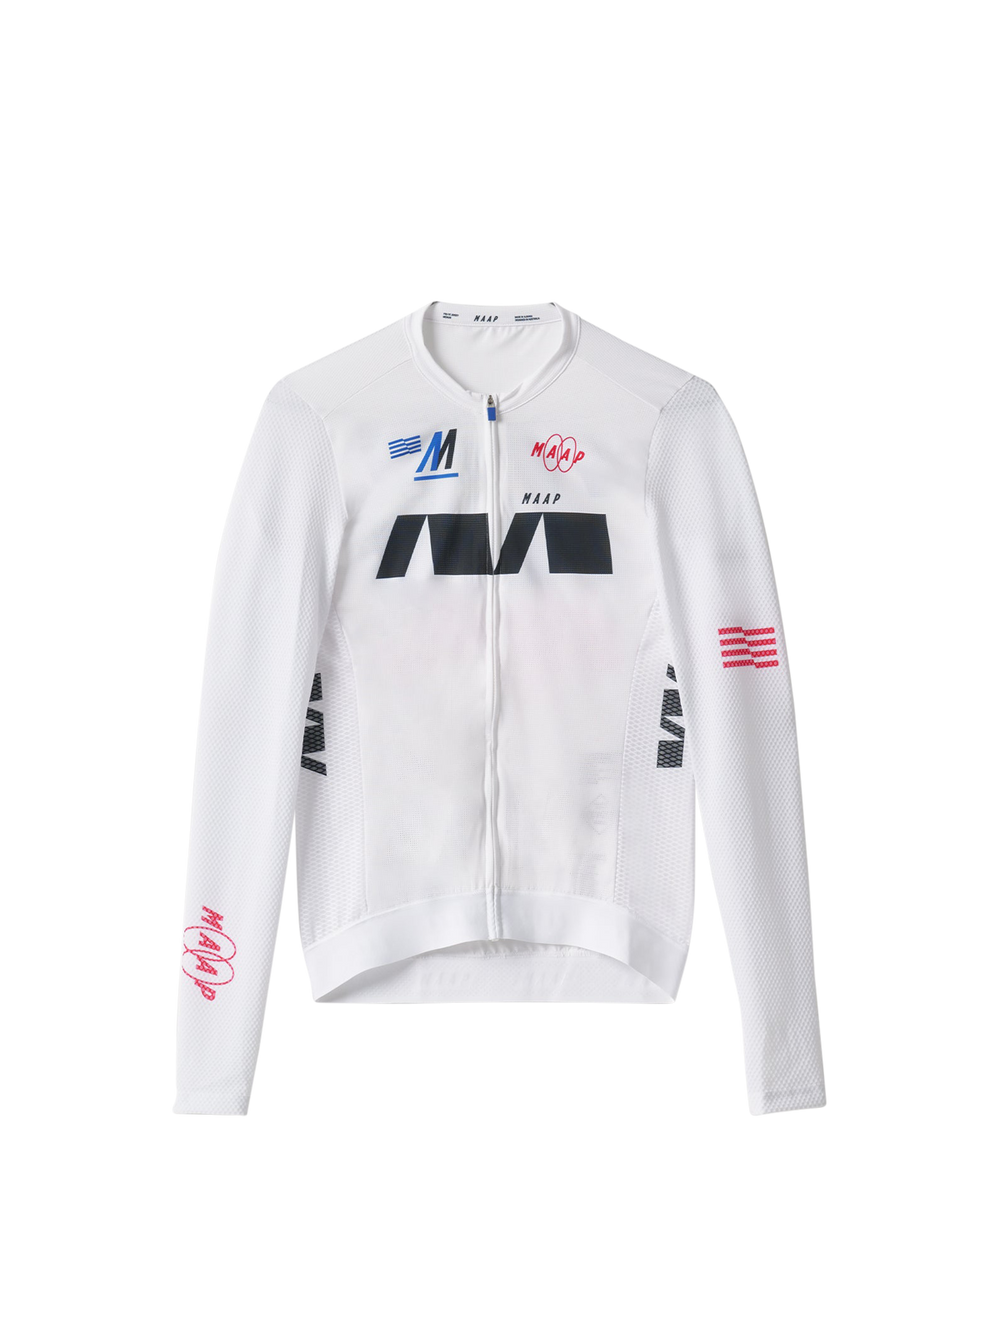 Product Image for Trace Pro Air LS Jersey